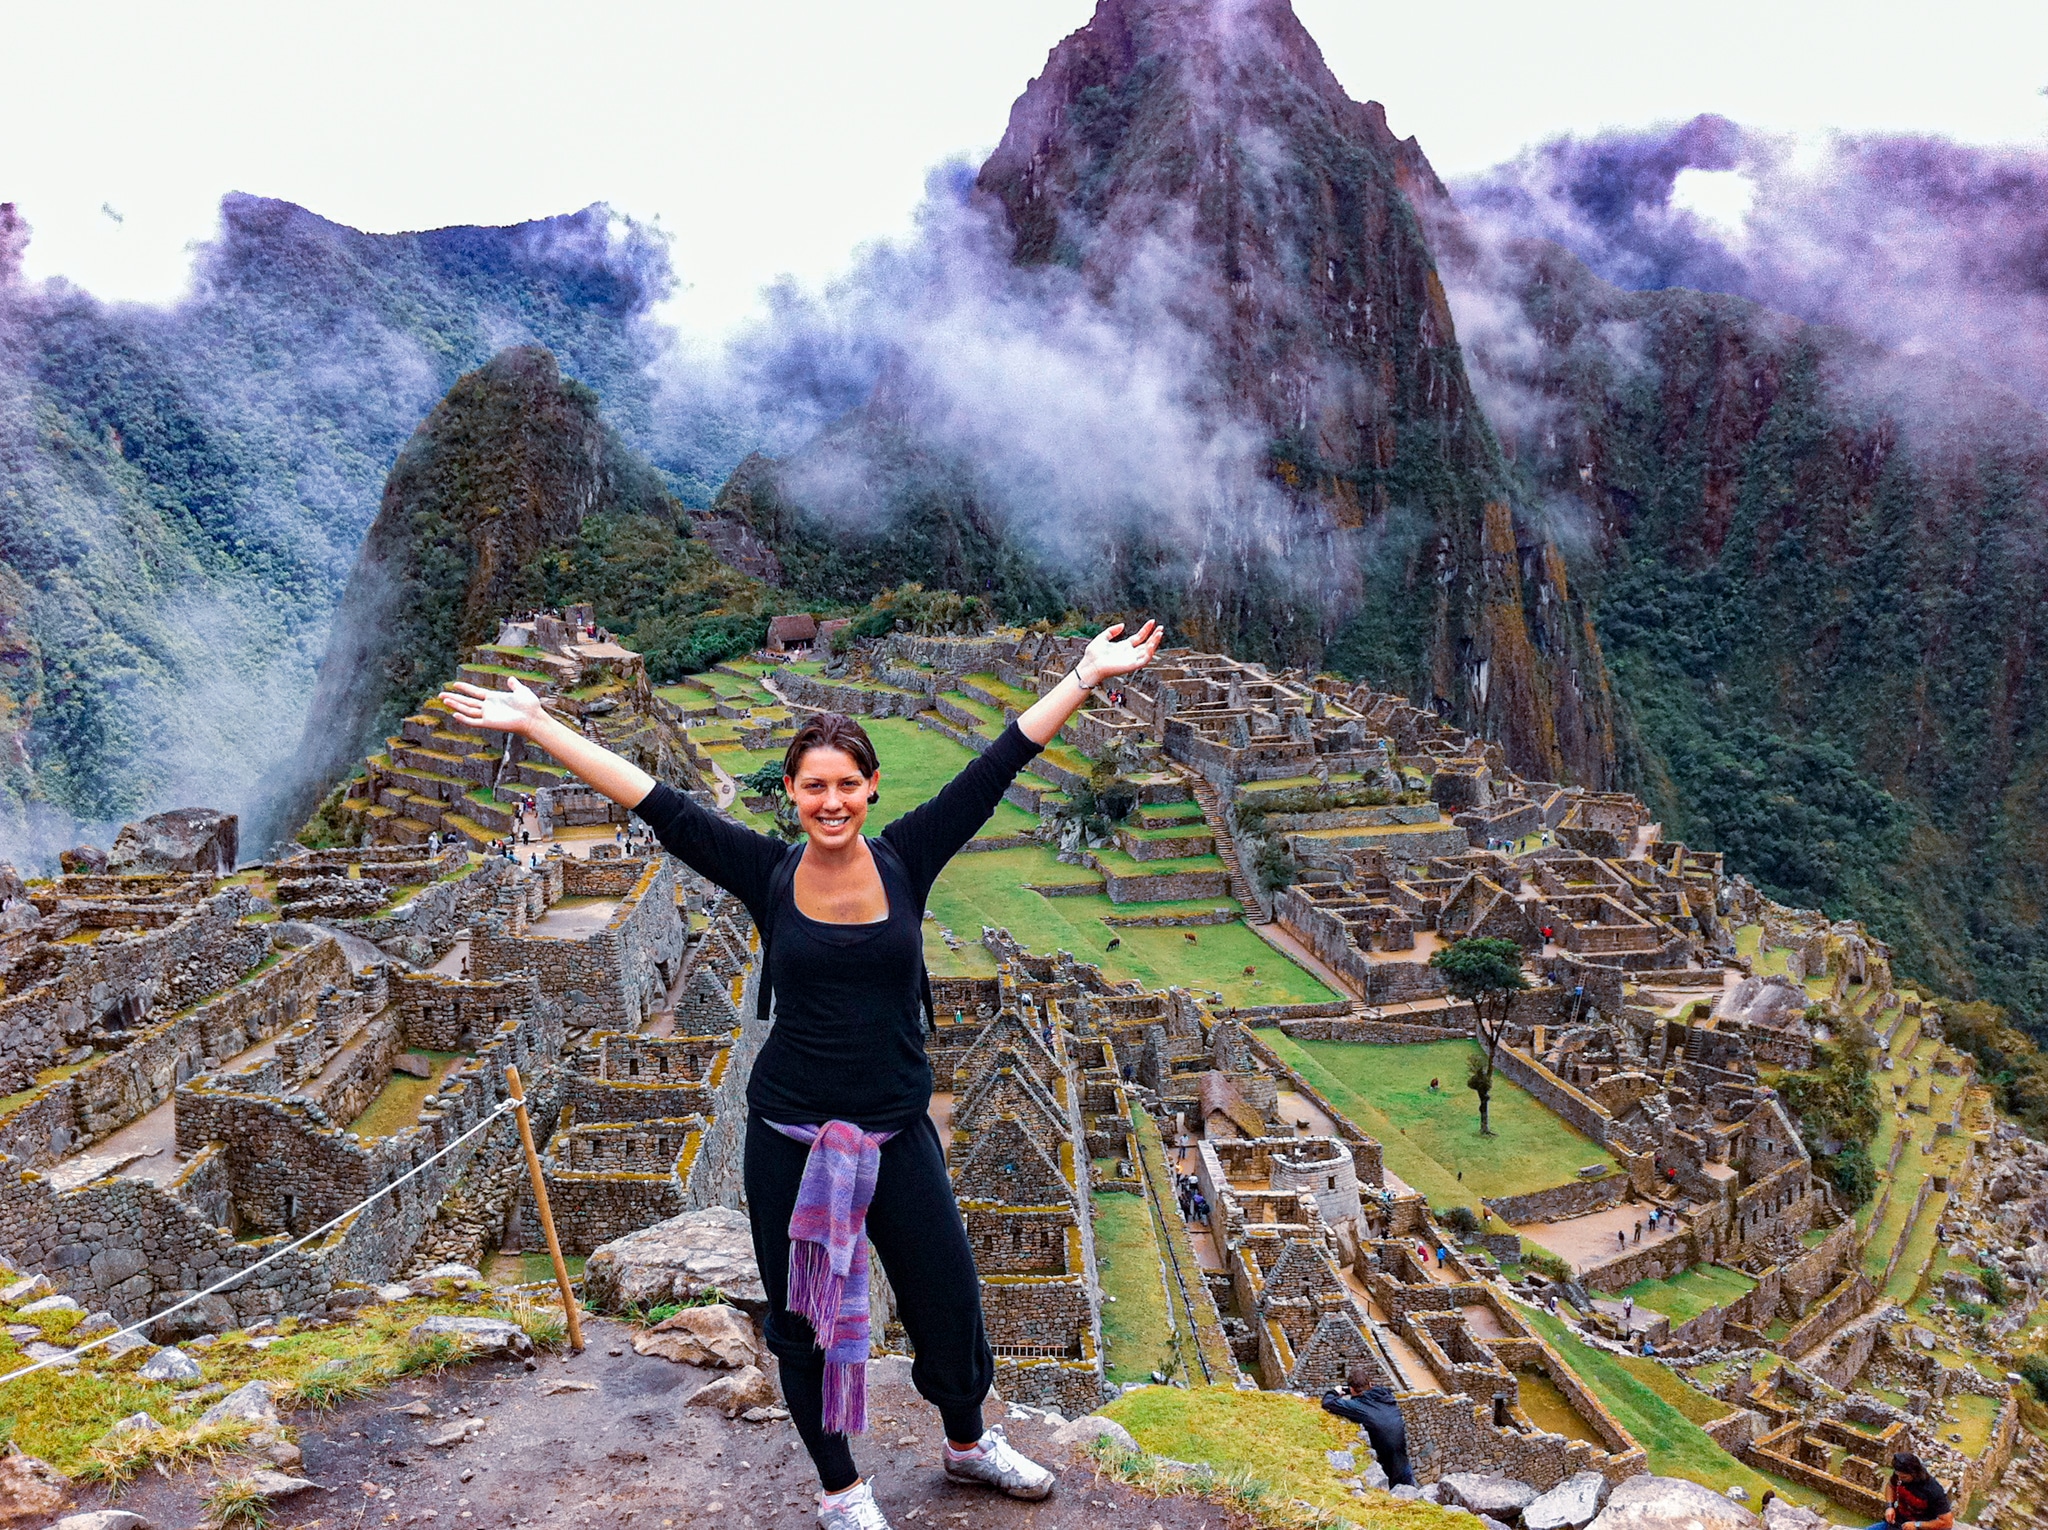 How to purchase Machu Picchu tickets